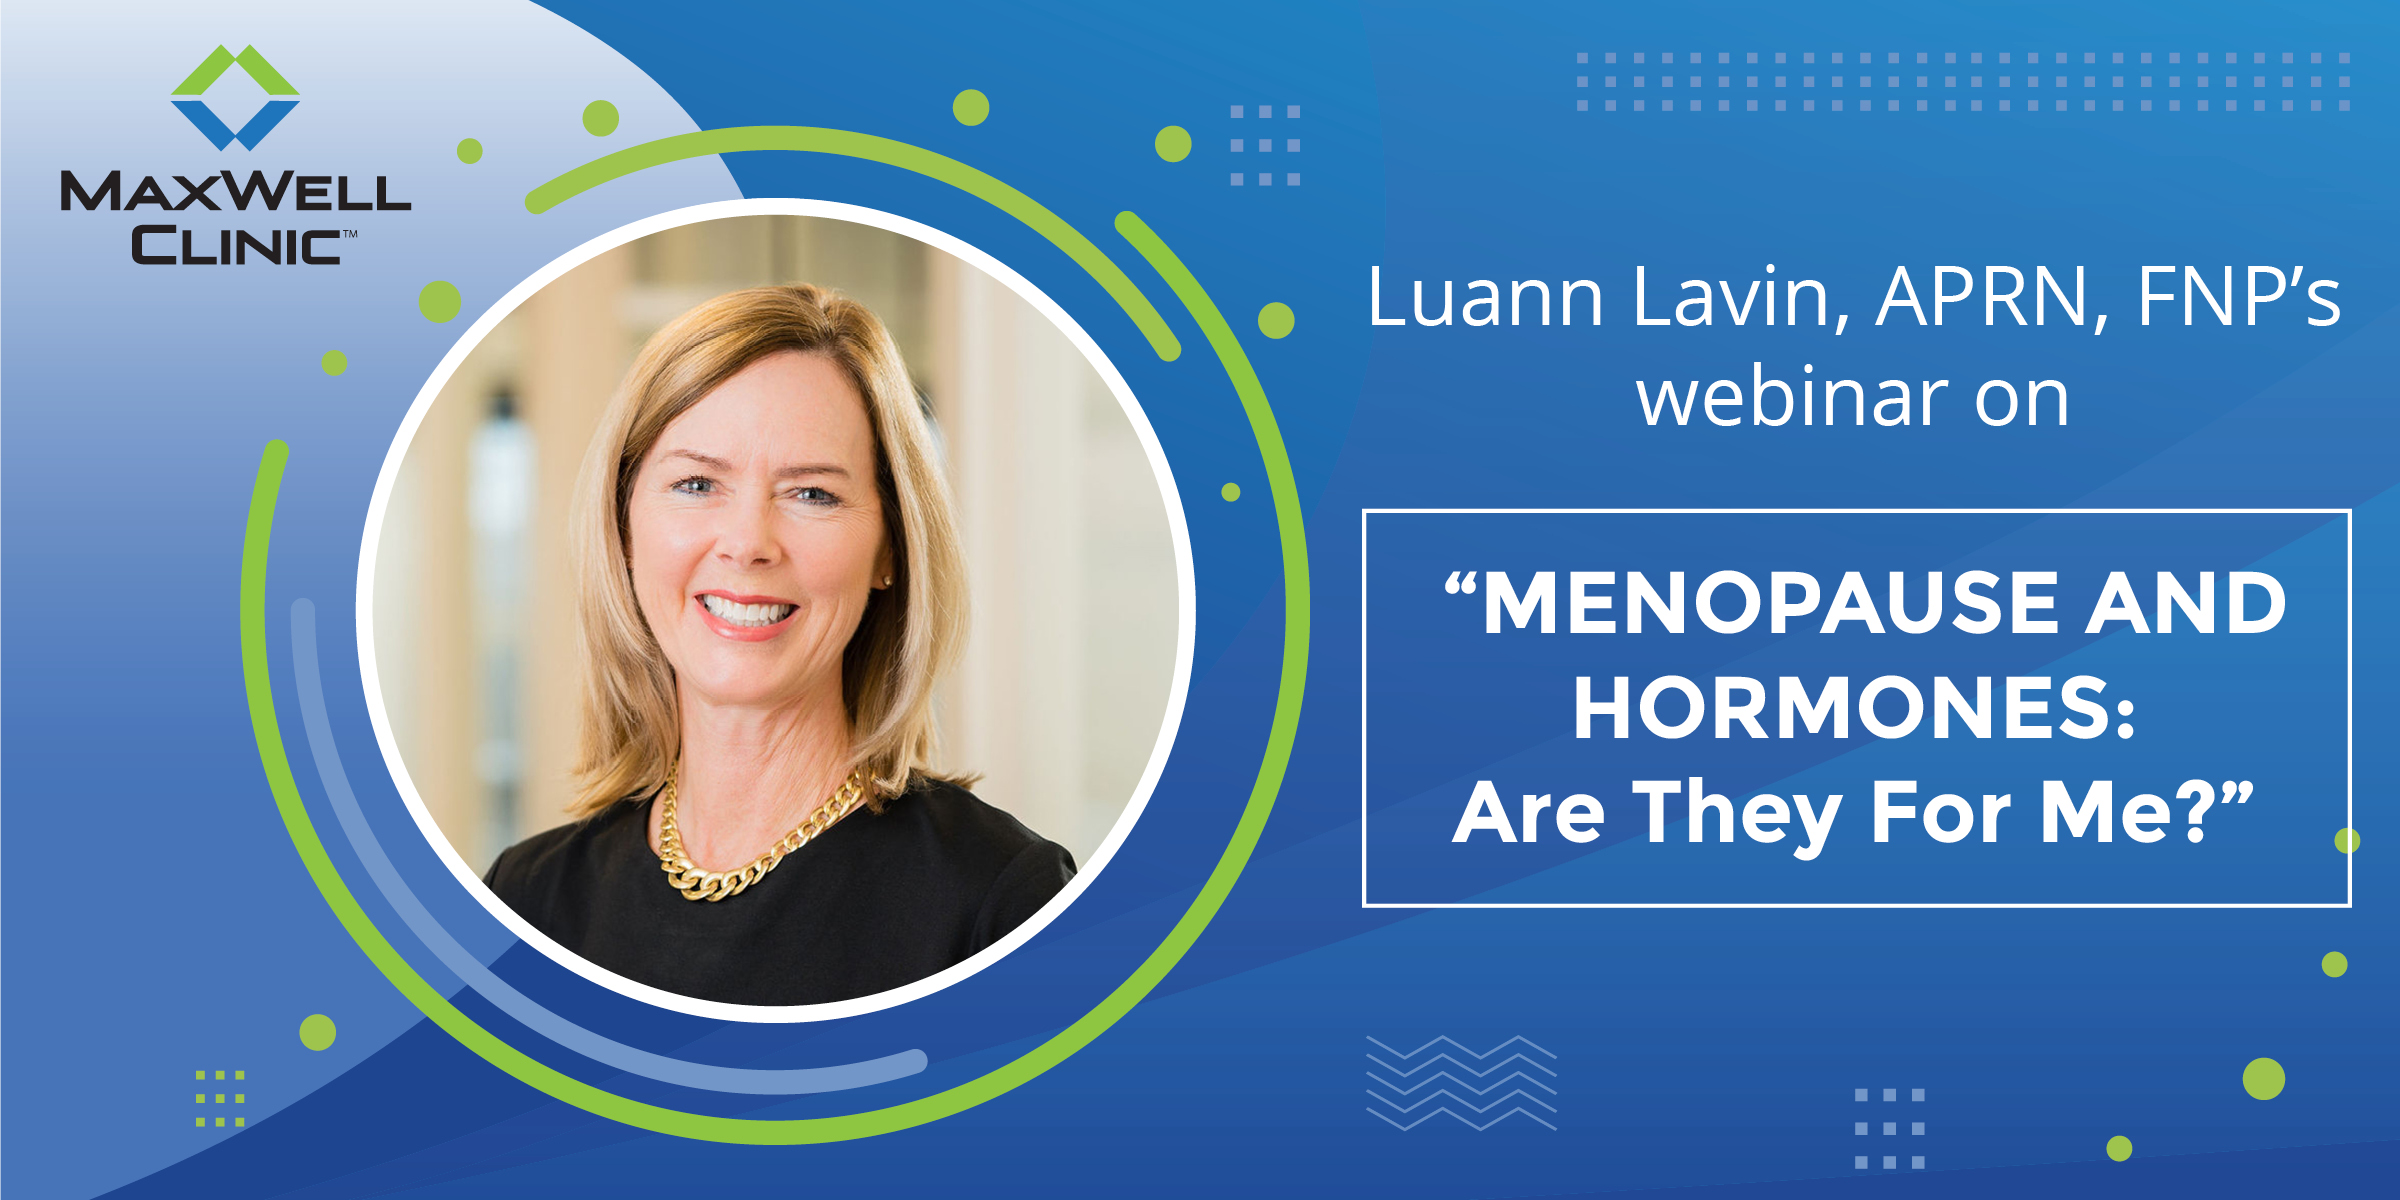 Menopause and Hormones: Are They For Me? Luann Lavin, APRN, FNP